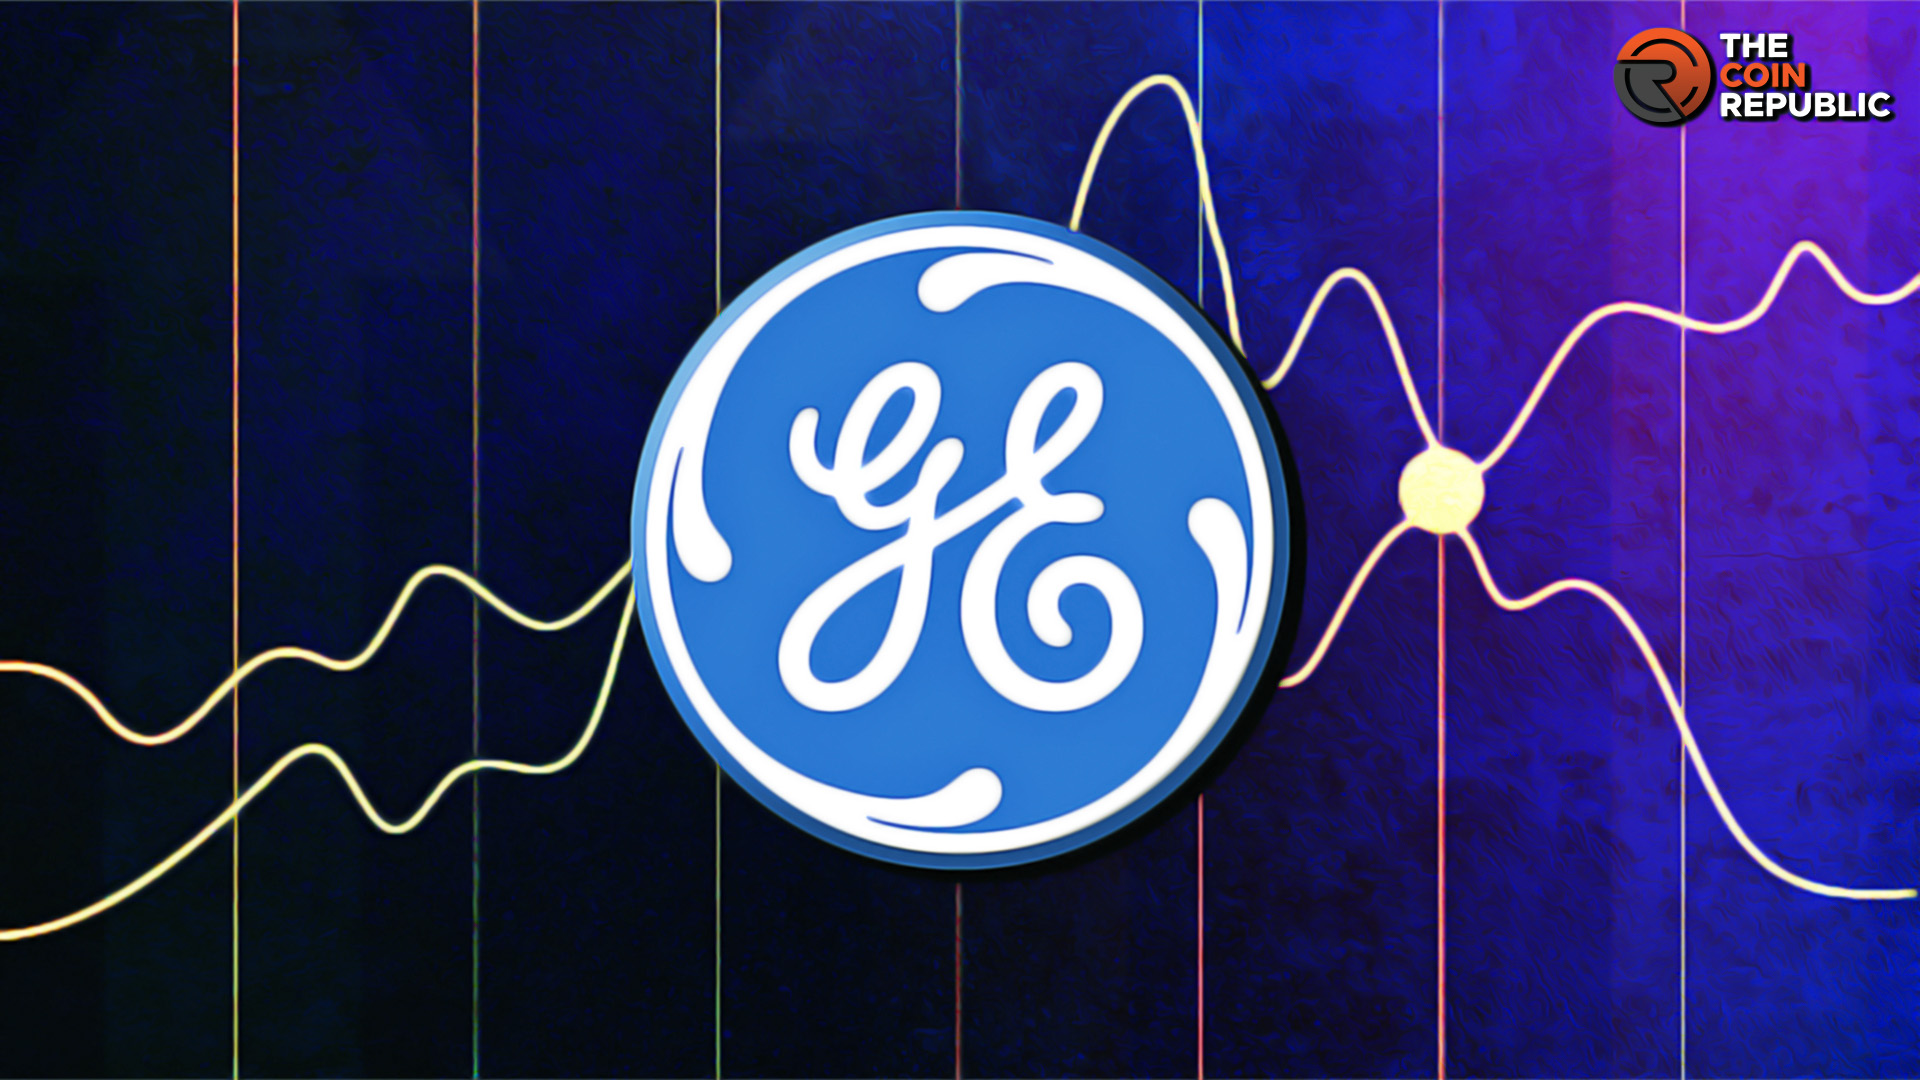 General Electric (GE) Stock: Can Positive Earnings Lead to $200?